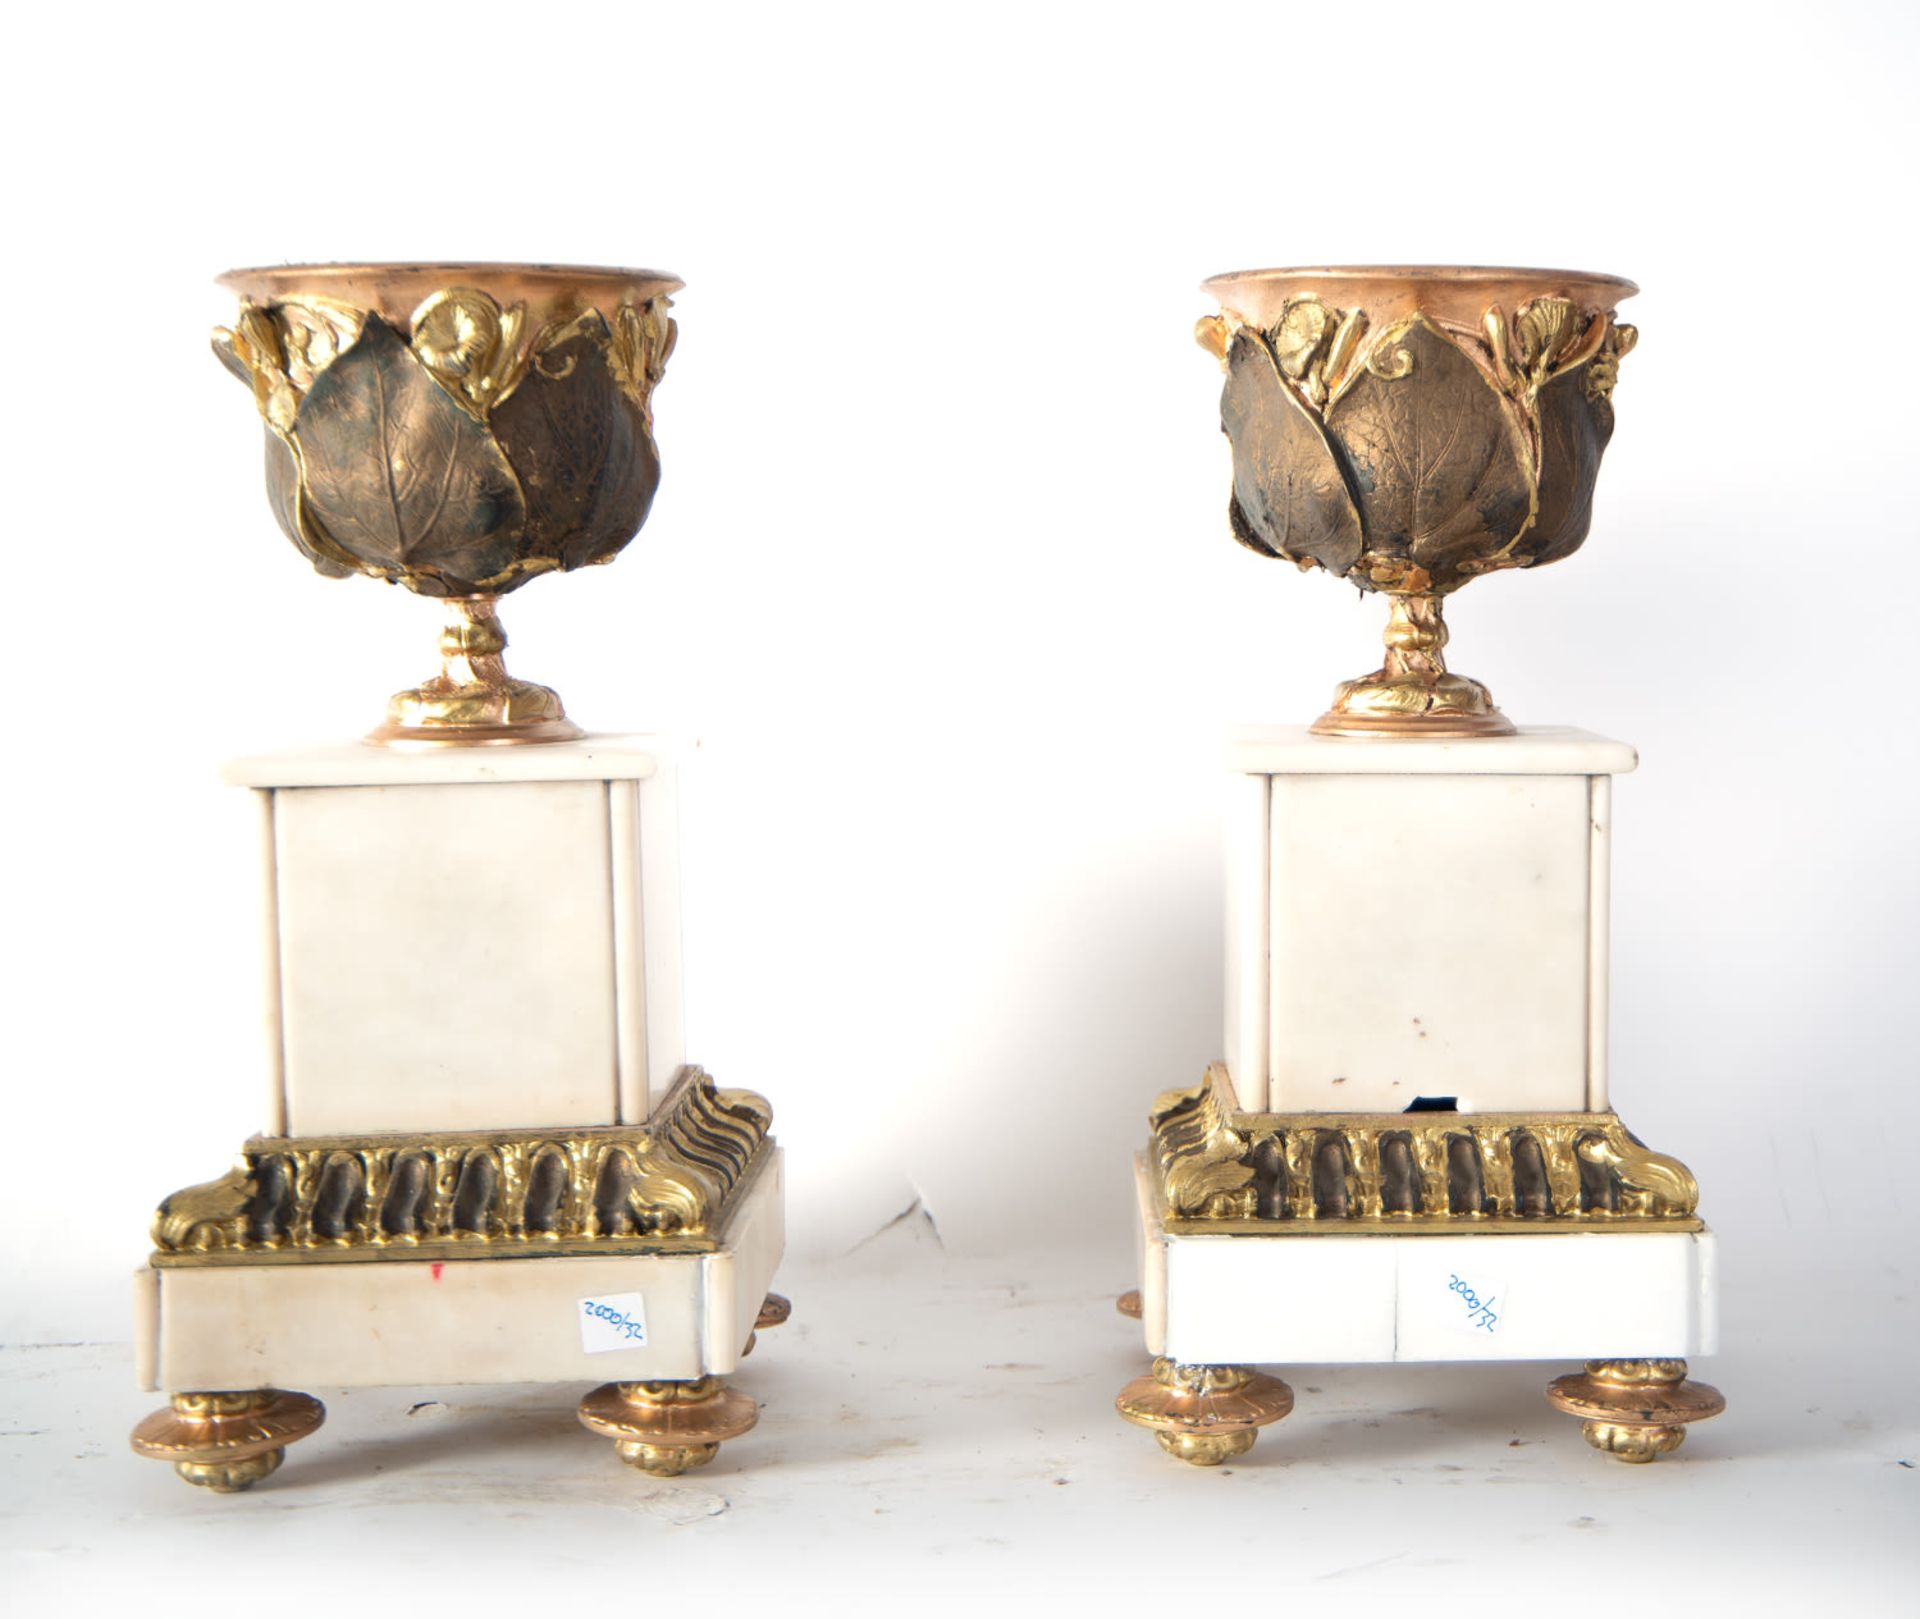 Bronze and white marble garniture with two cassolettes, "Allegory of Motherhood", 19th century - Image 6 of 9